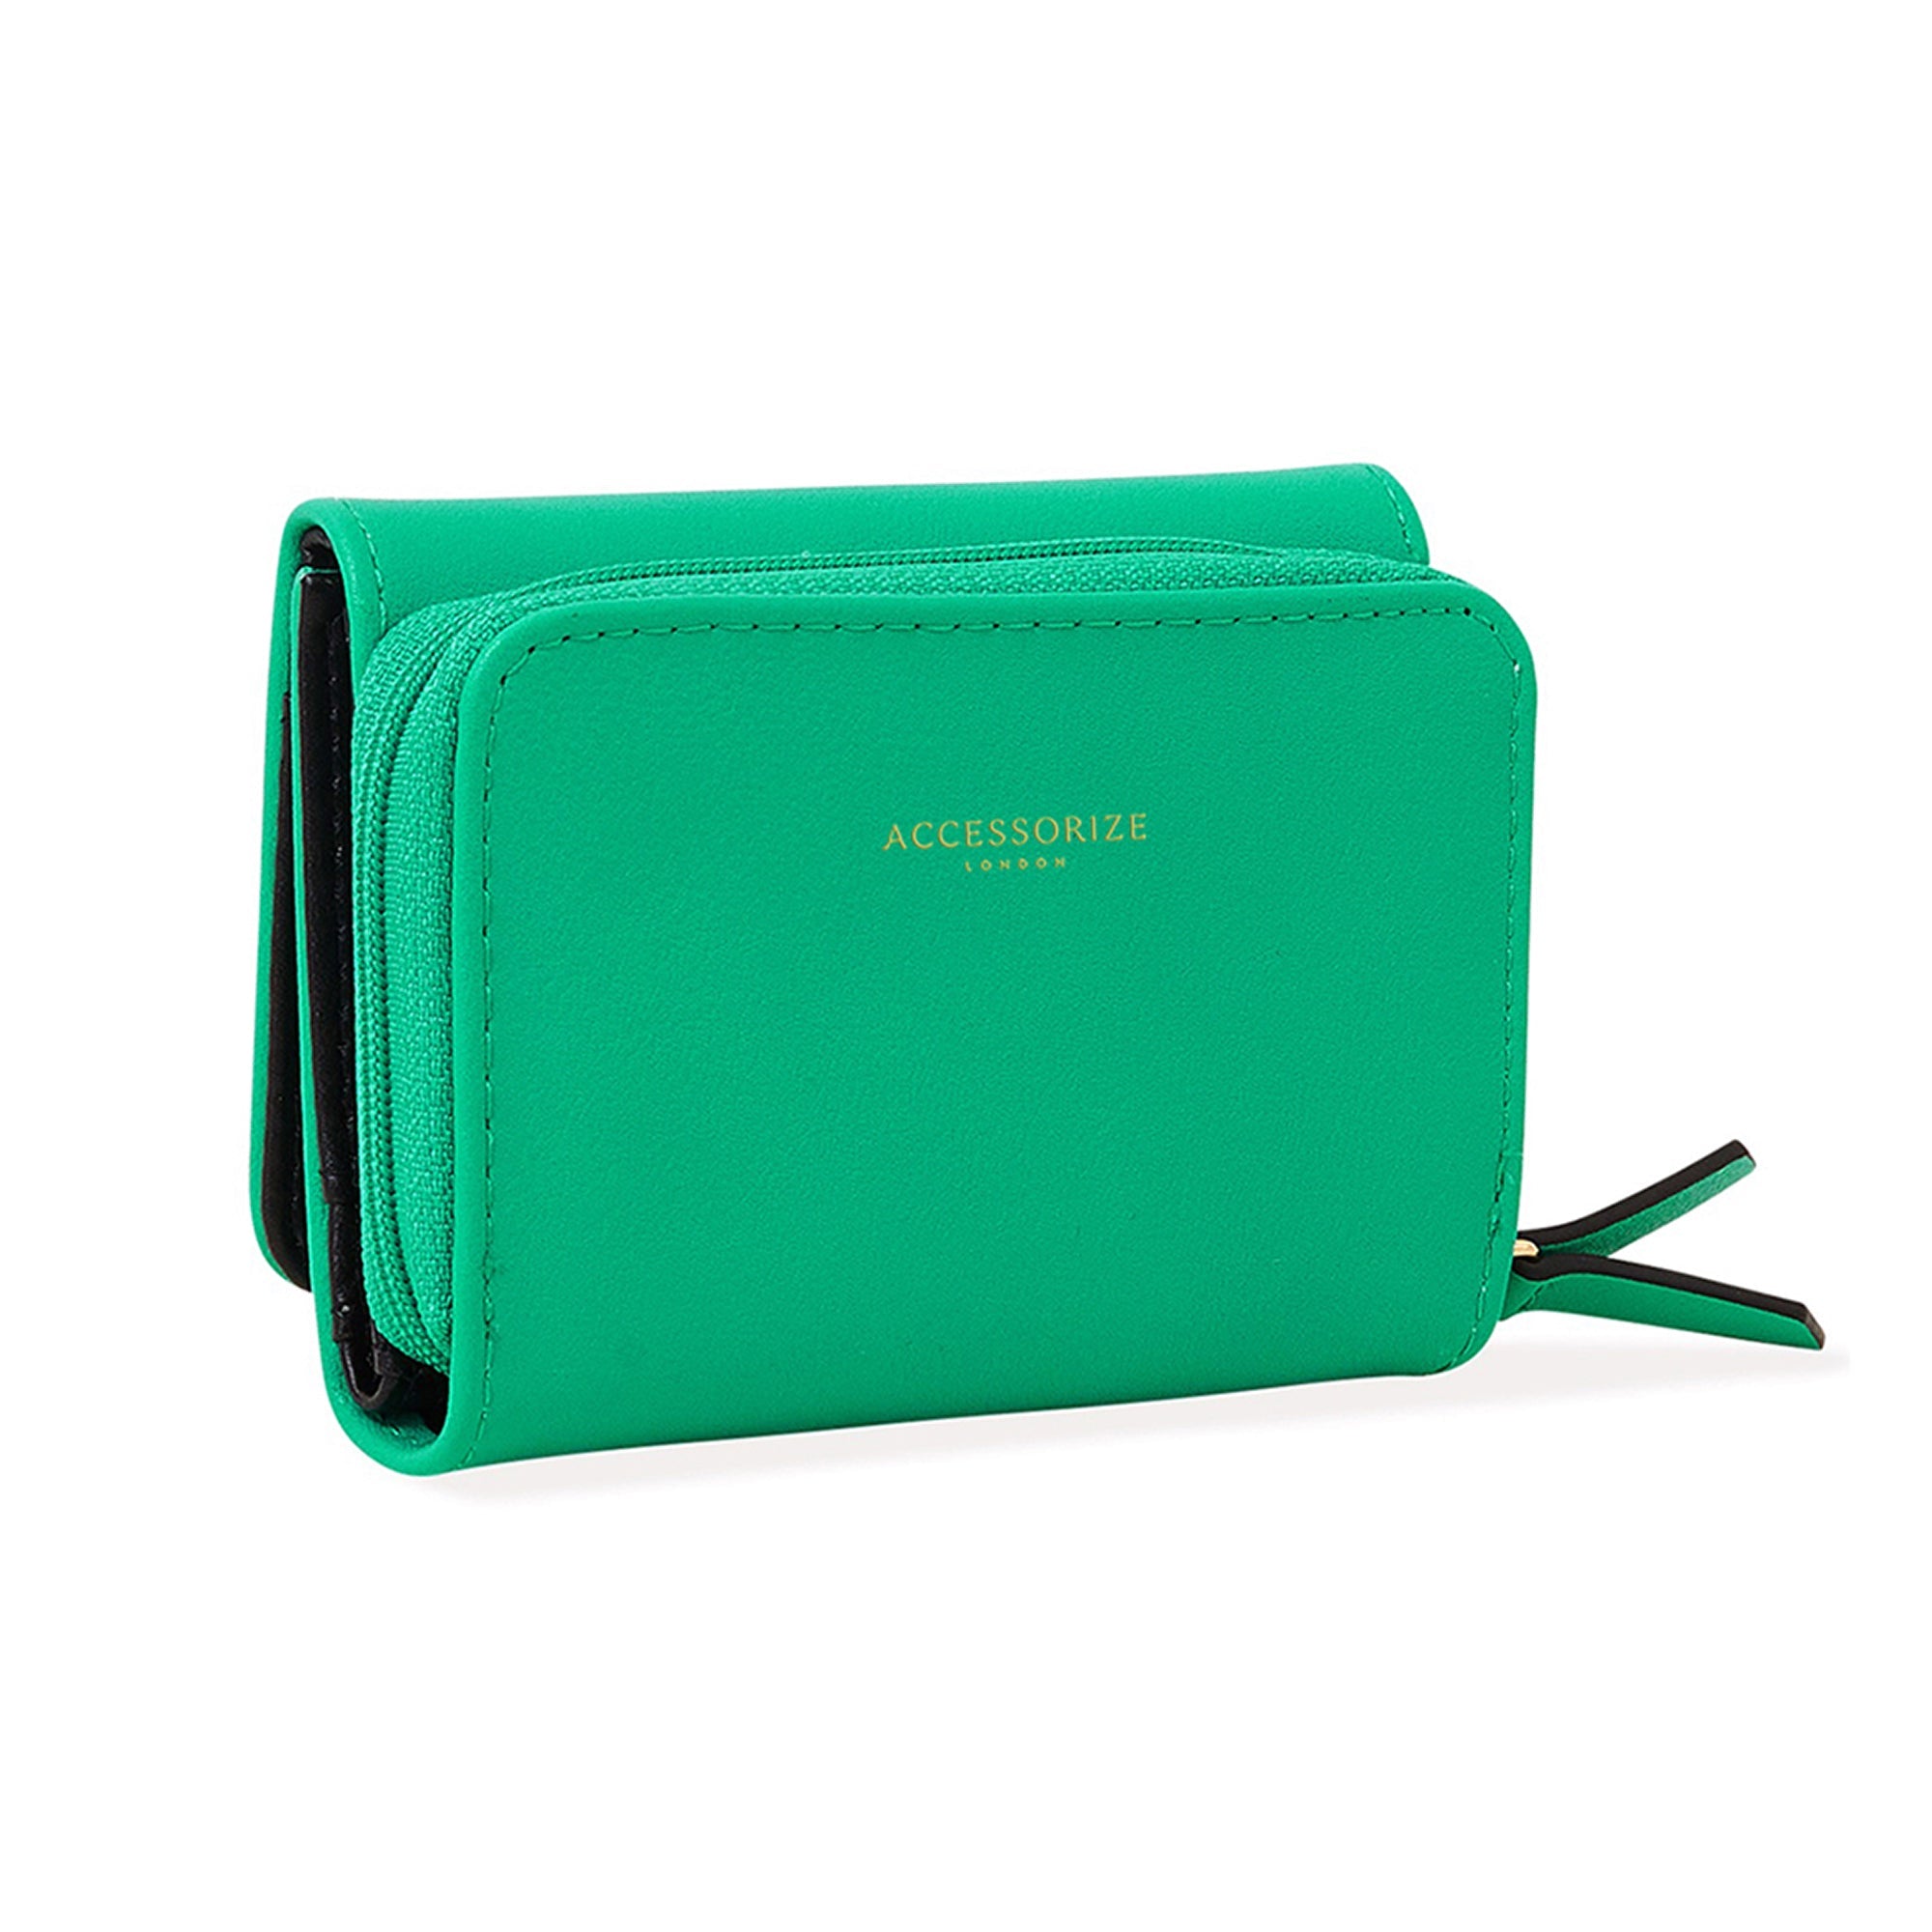 Accessorize Green Wallets - Buy Accessorize Green Wallets online in India